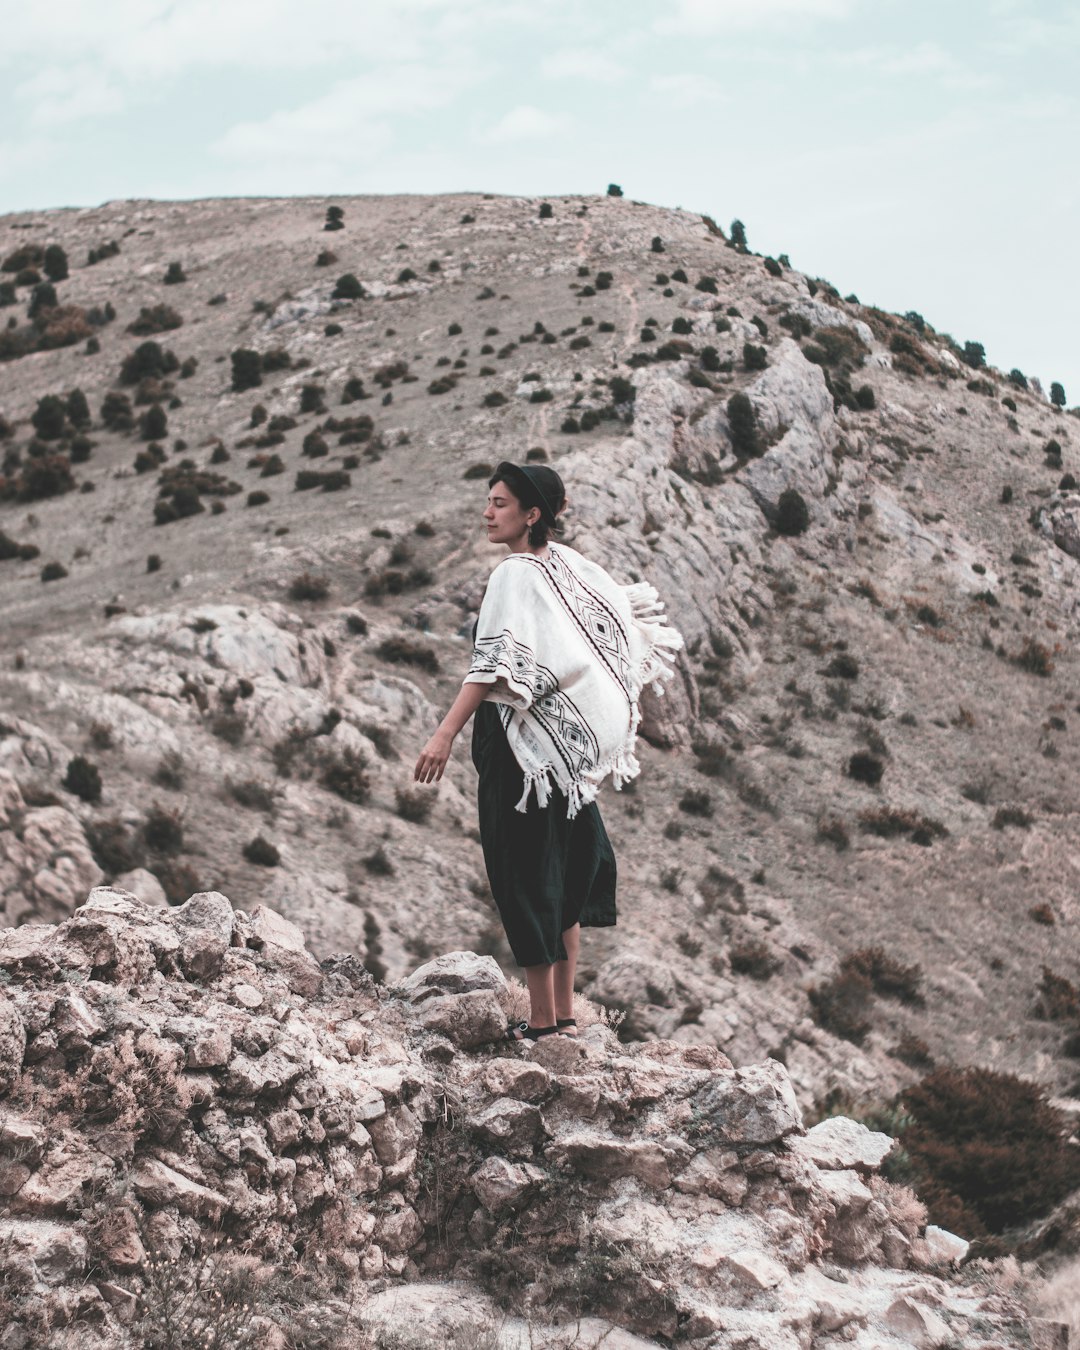 person in white top standing on mountain during daytime